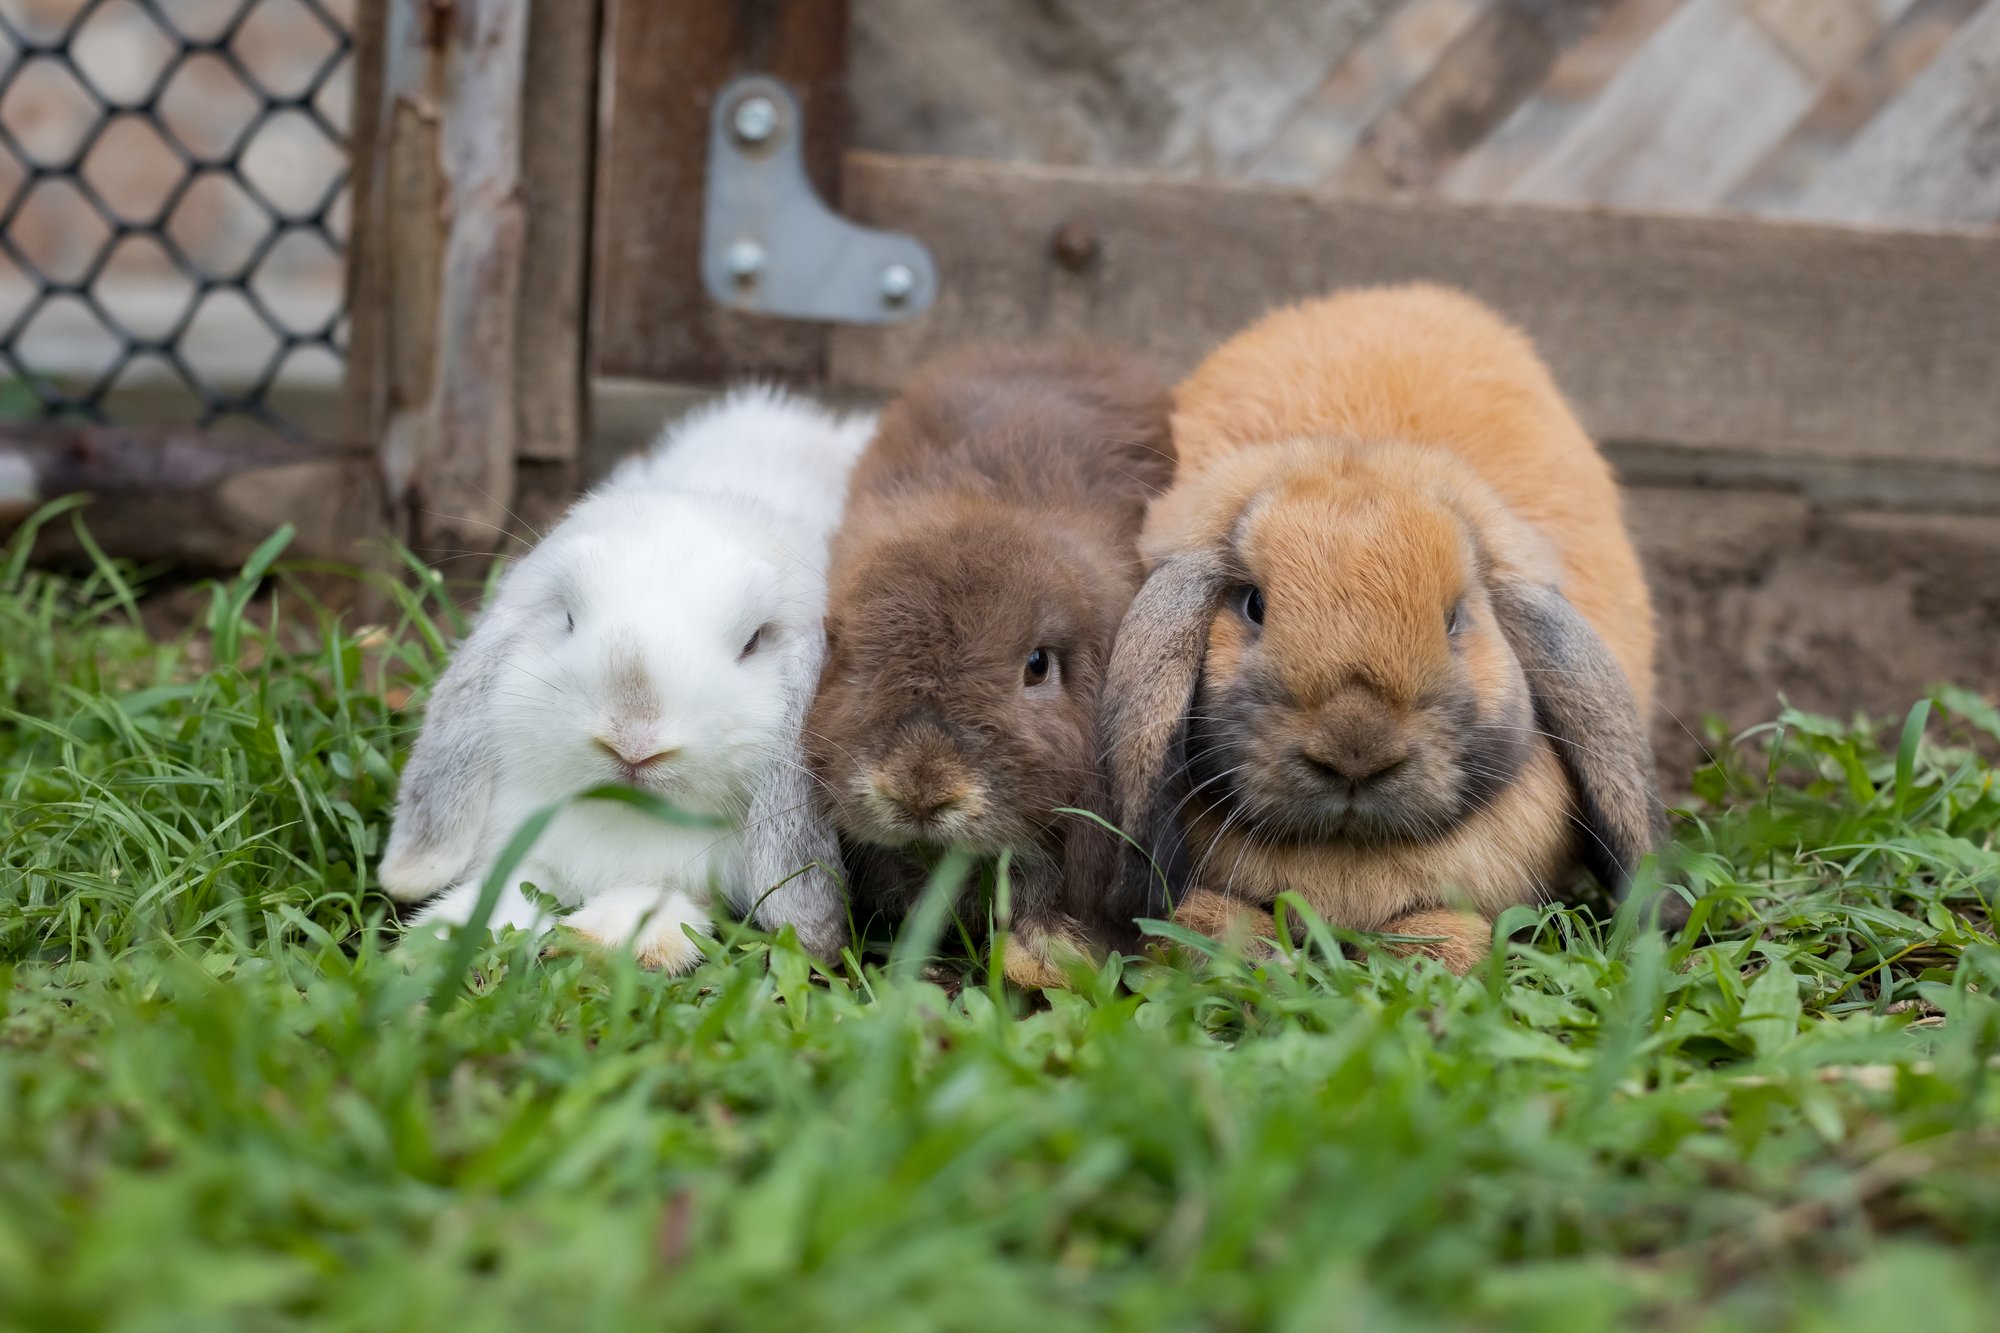 brown, white, and dark brown rabbits sitting next to each other